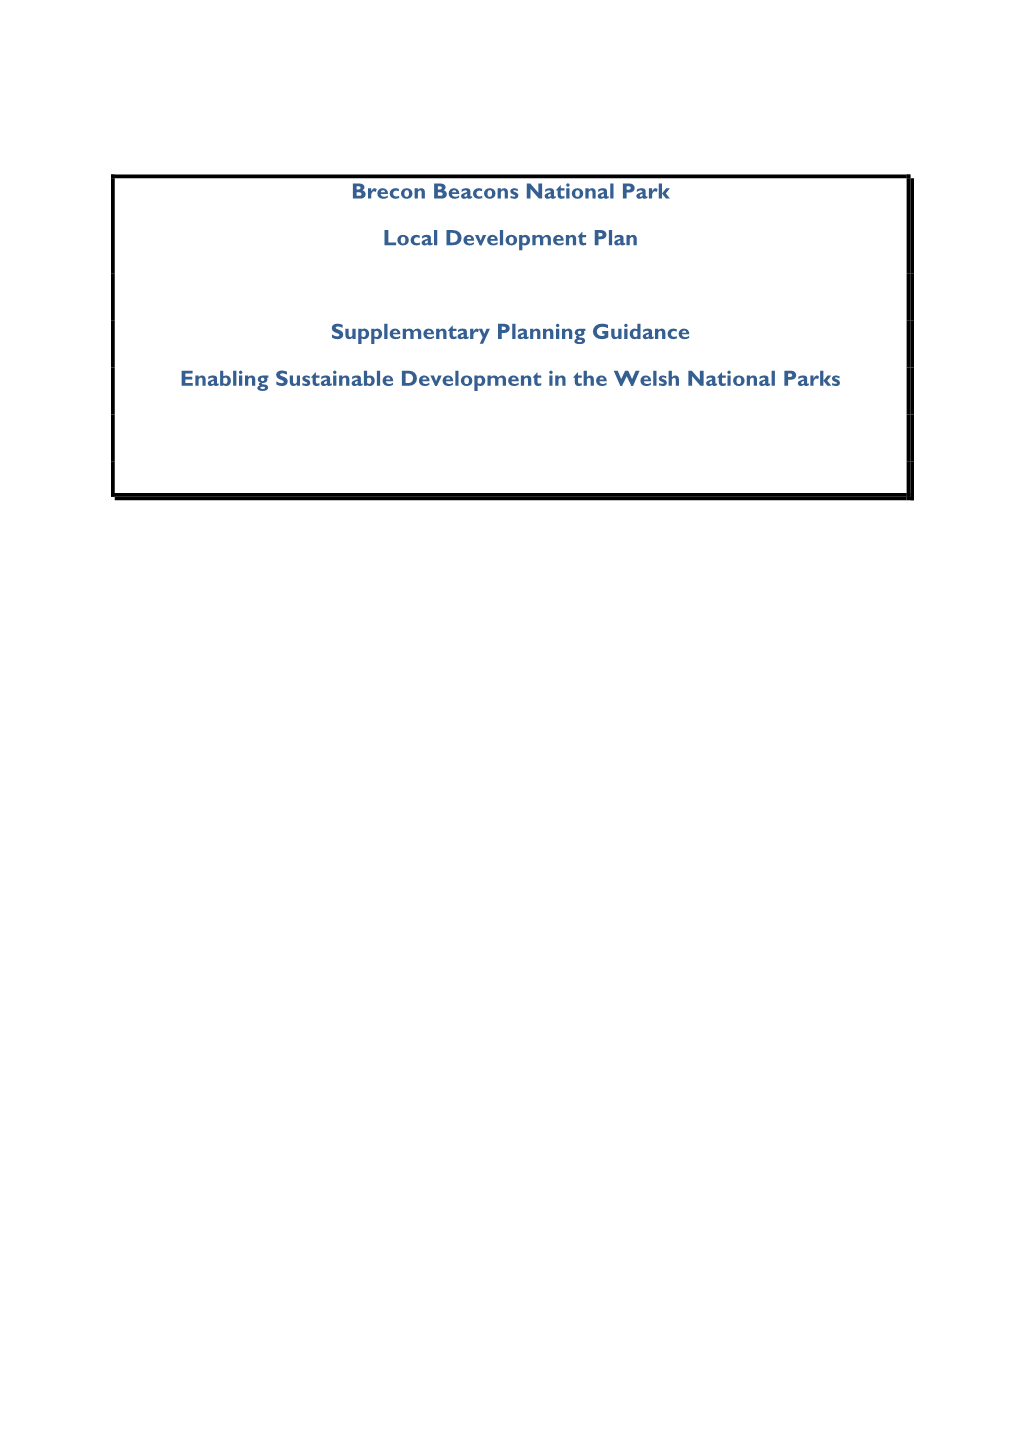 Planning Considerations for All Developments in the National Parks 6